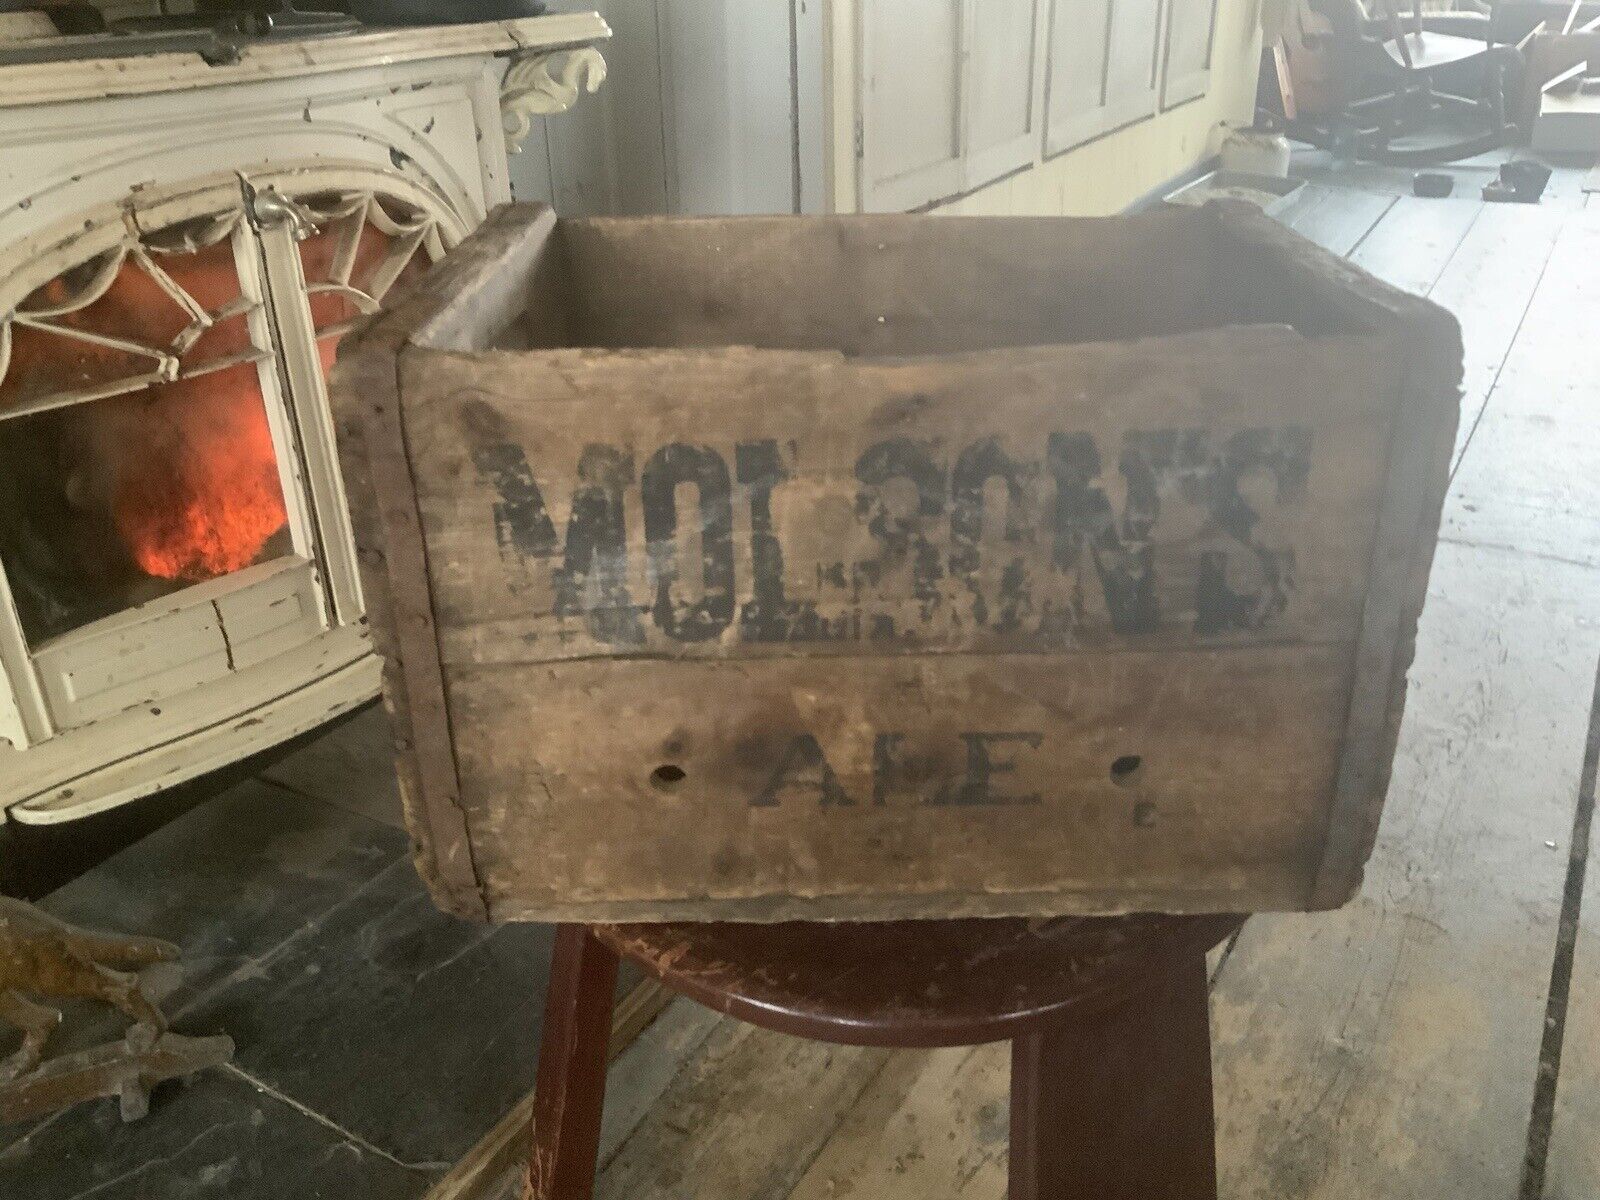 Antique MOLSON’S ALE Beer Wooden Wood Bottle Box Crate Advertising Country Store